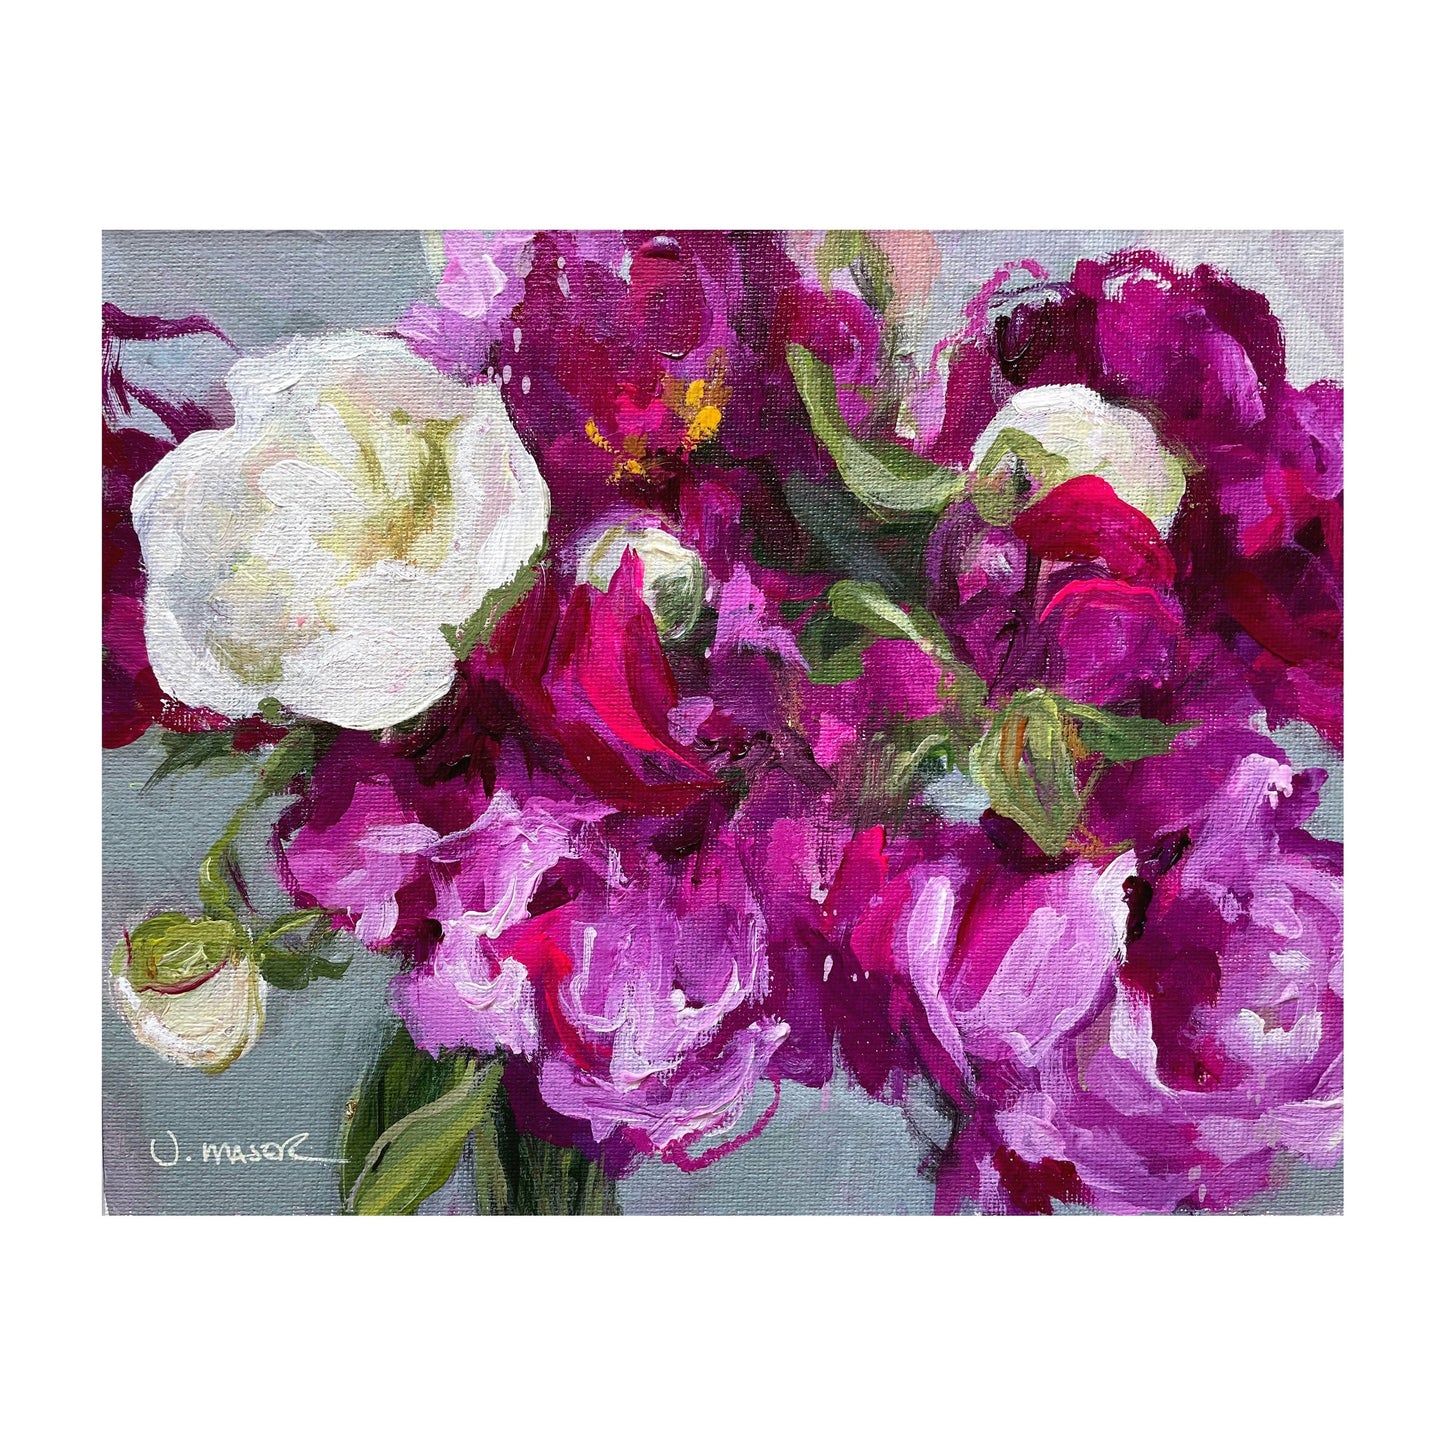 Peonies Study - Original acrylic and pastel. Mixed media floral painting. Impressionistic floral art.